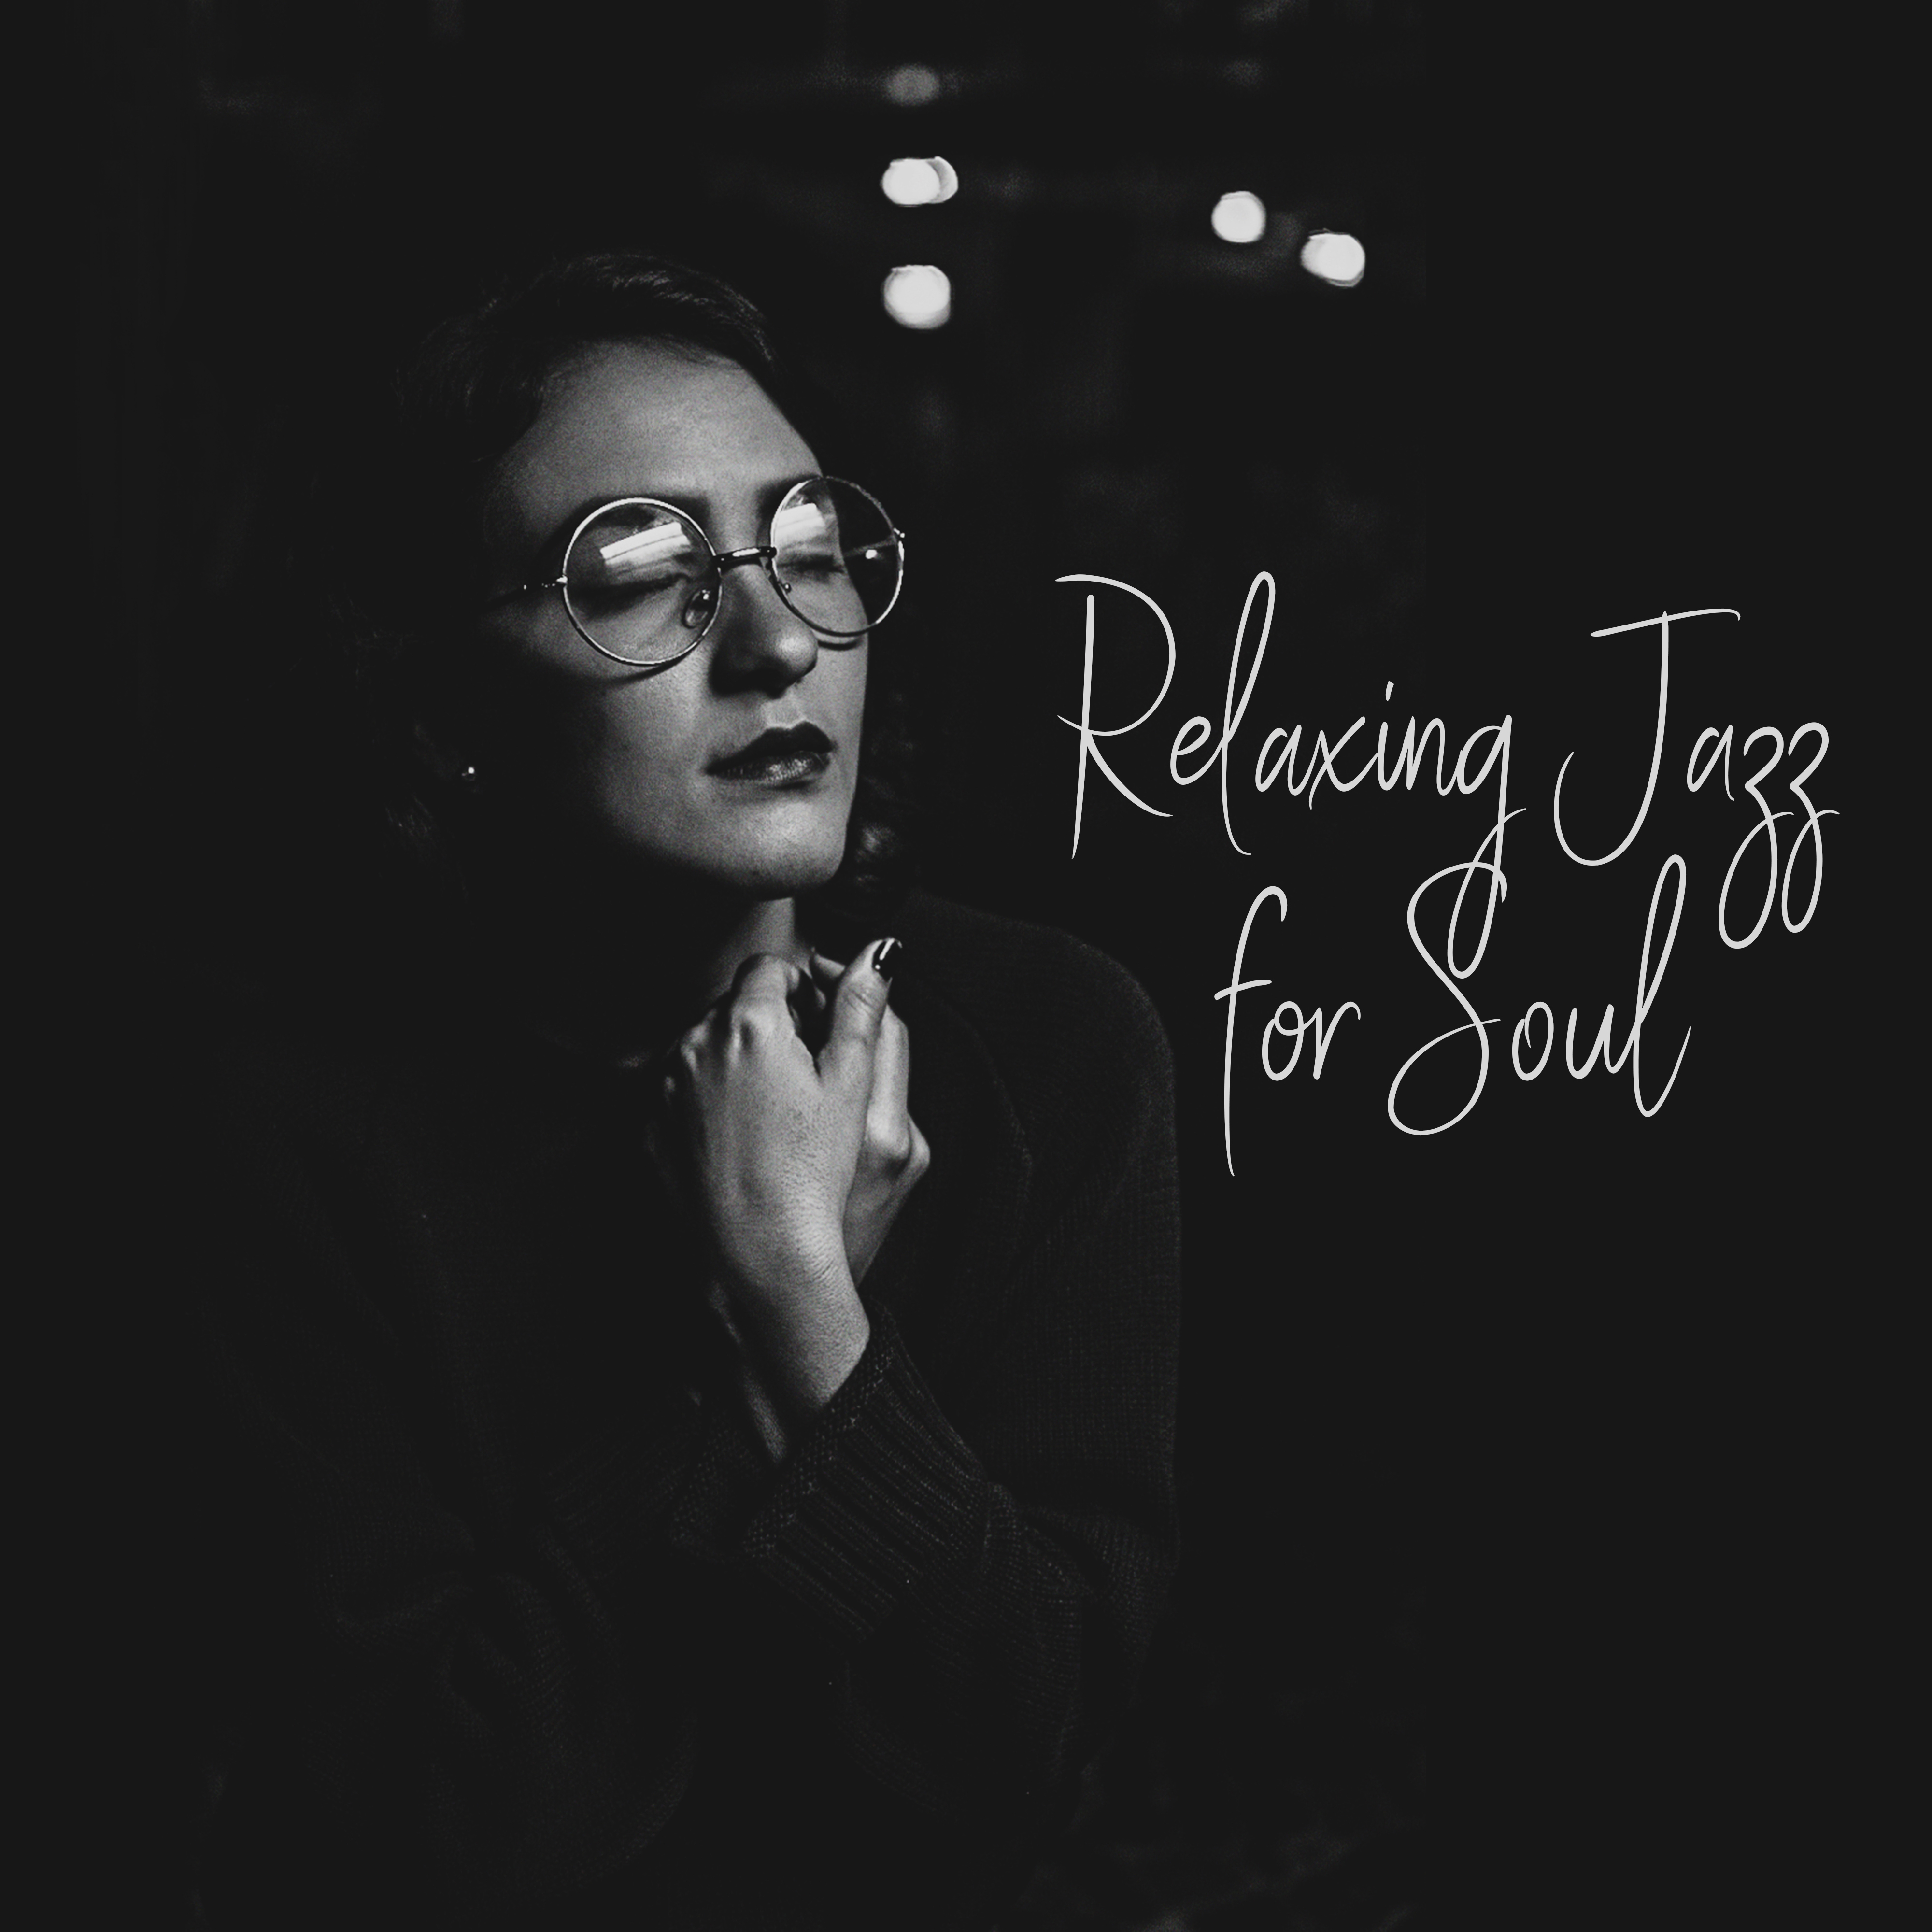 Relaxing Jazz for Soul